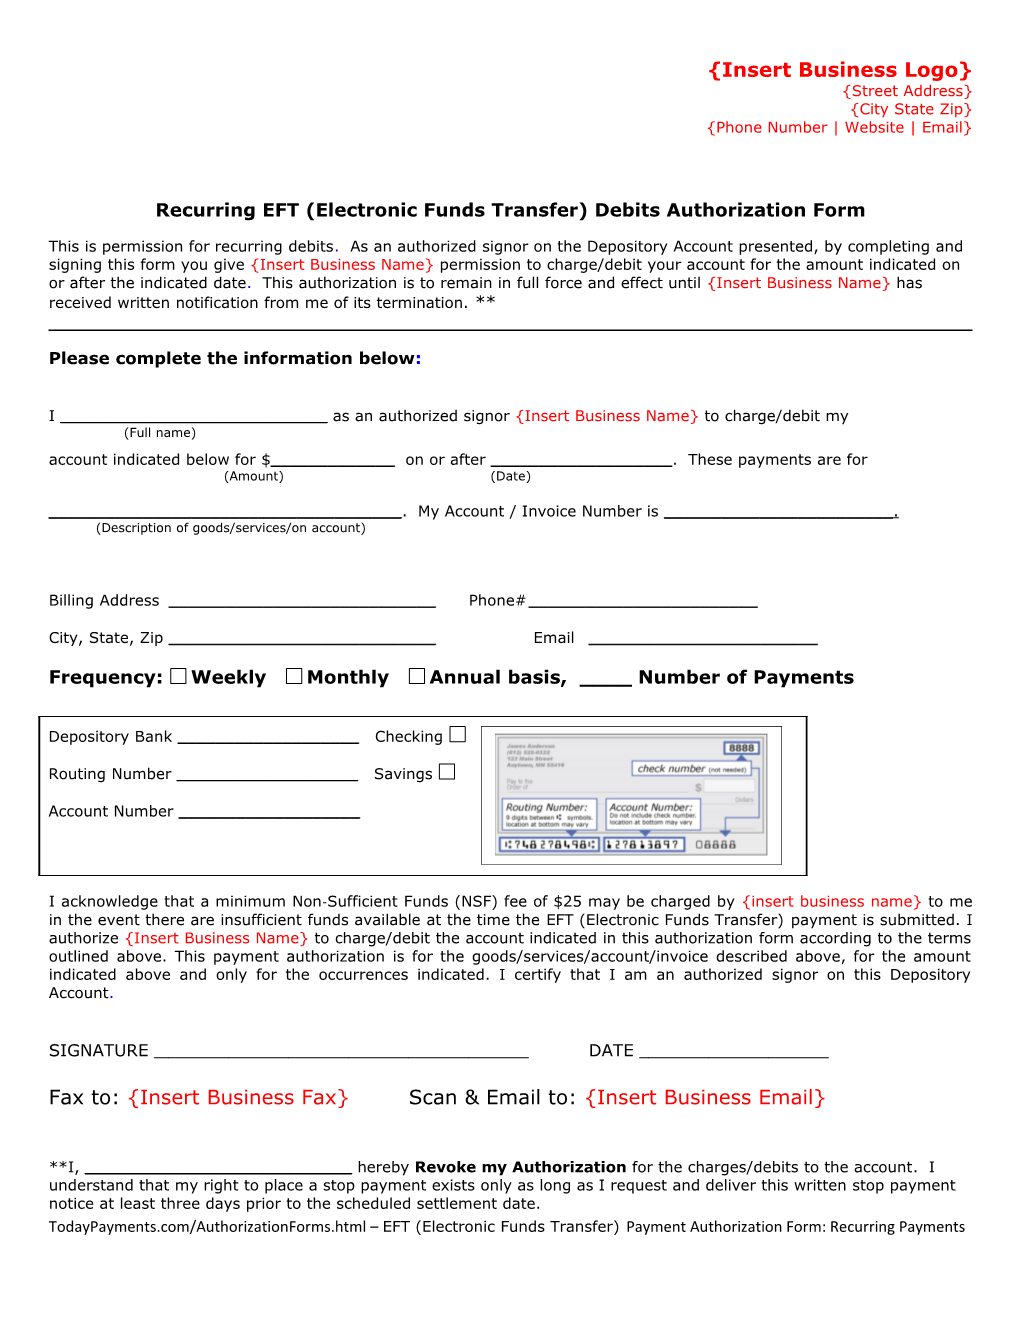 Recurring EFT (Electronic Funds Transfer) Debit Authorization Form